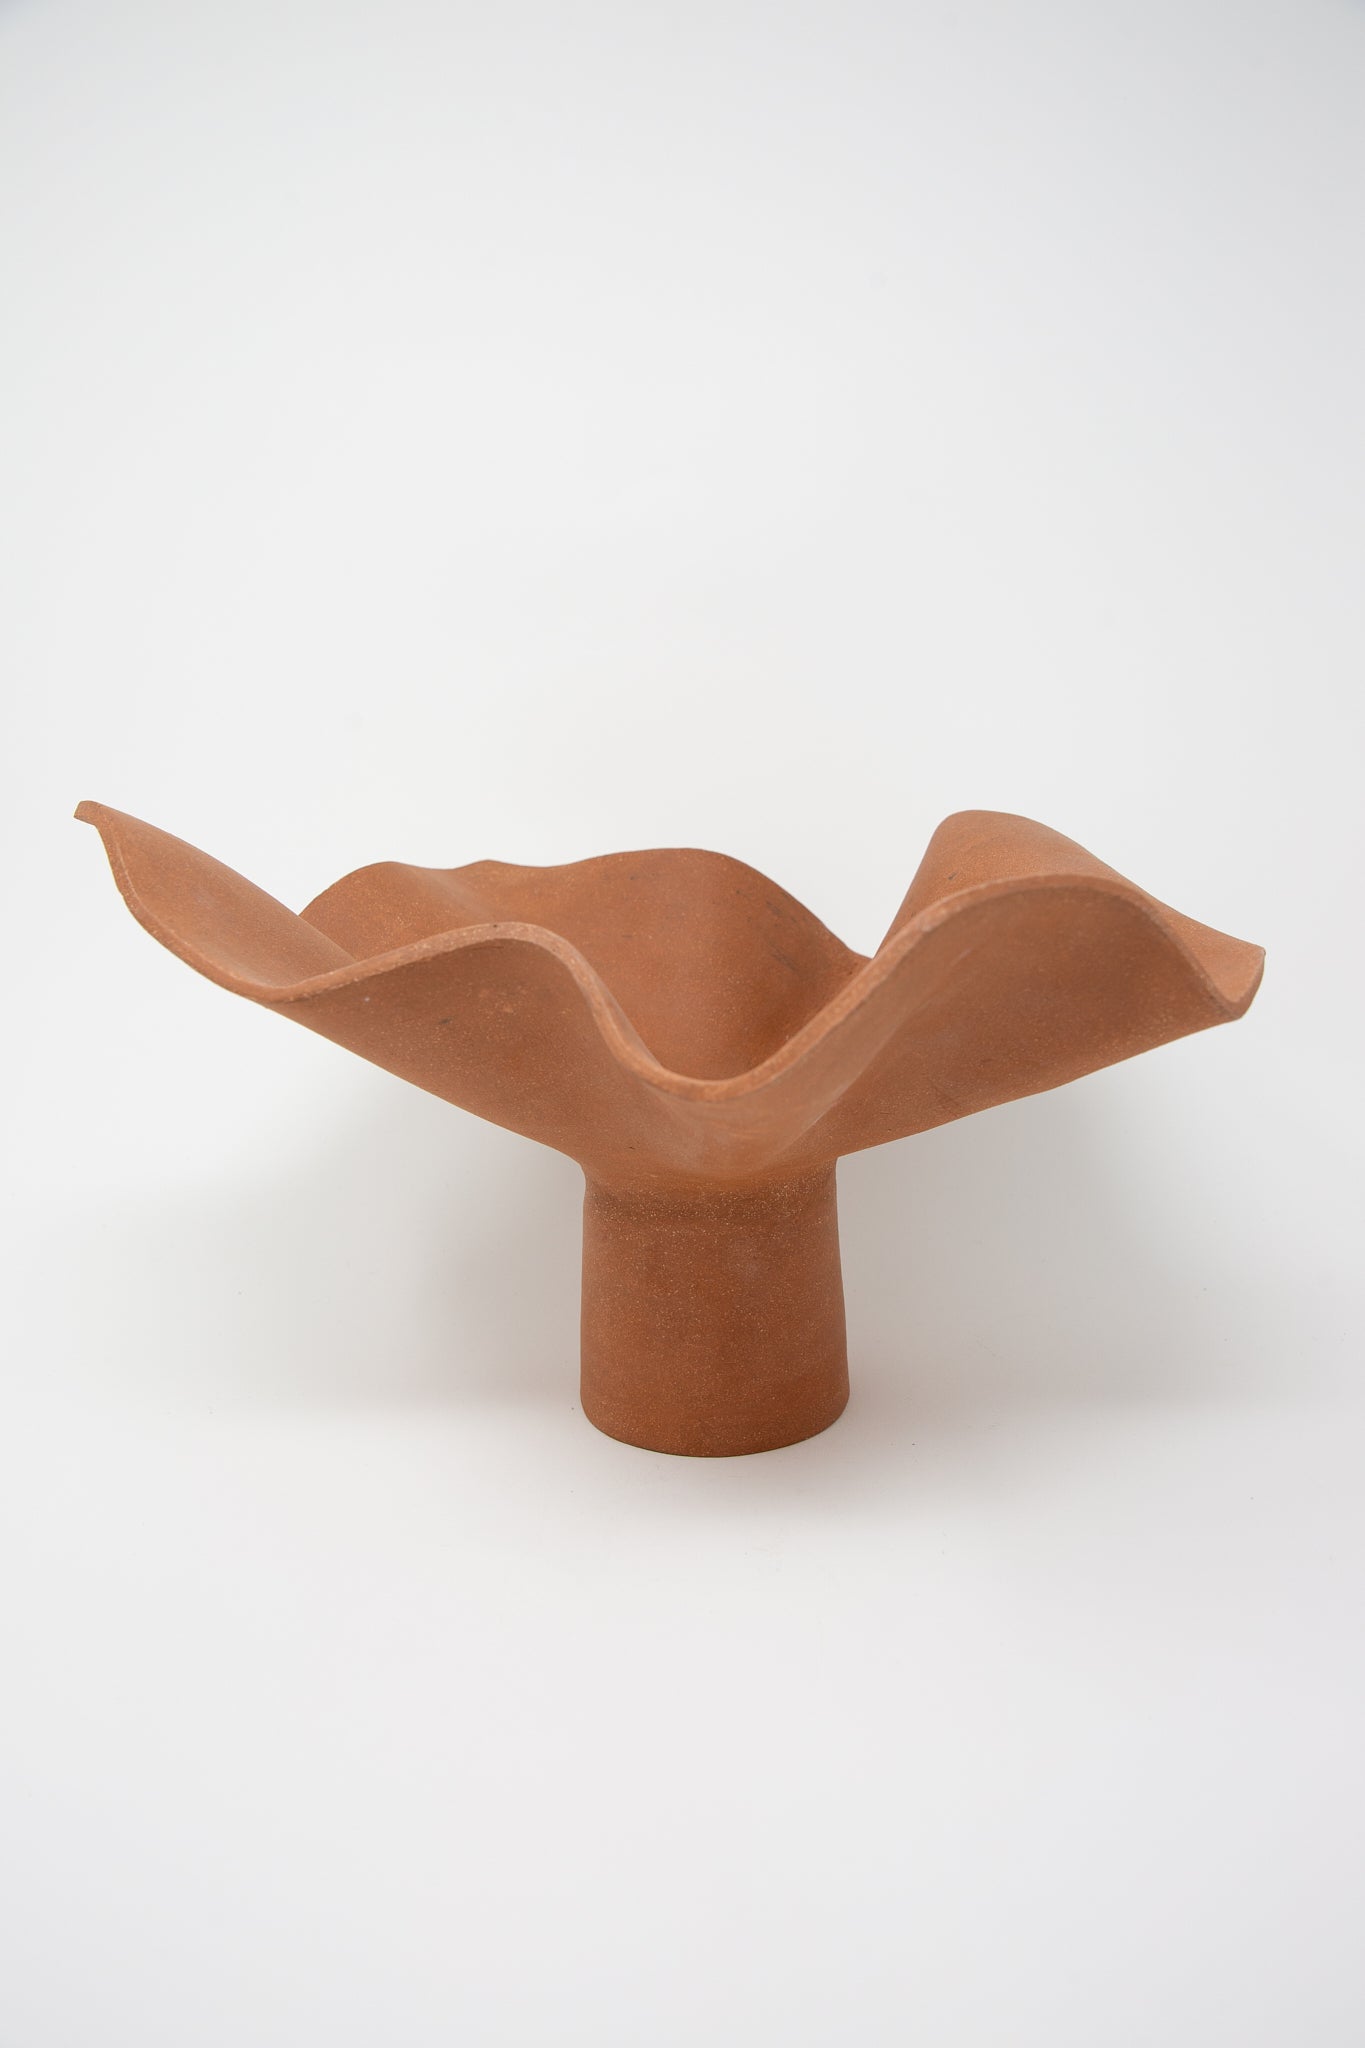 A Lost Quarry handmade Ruffle Pedestal in Terracotta sculpture of a red clay bowl on a white background.